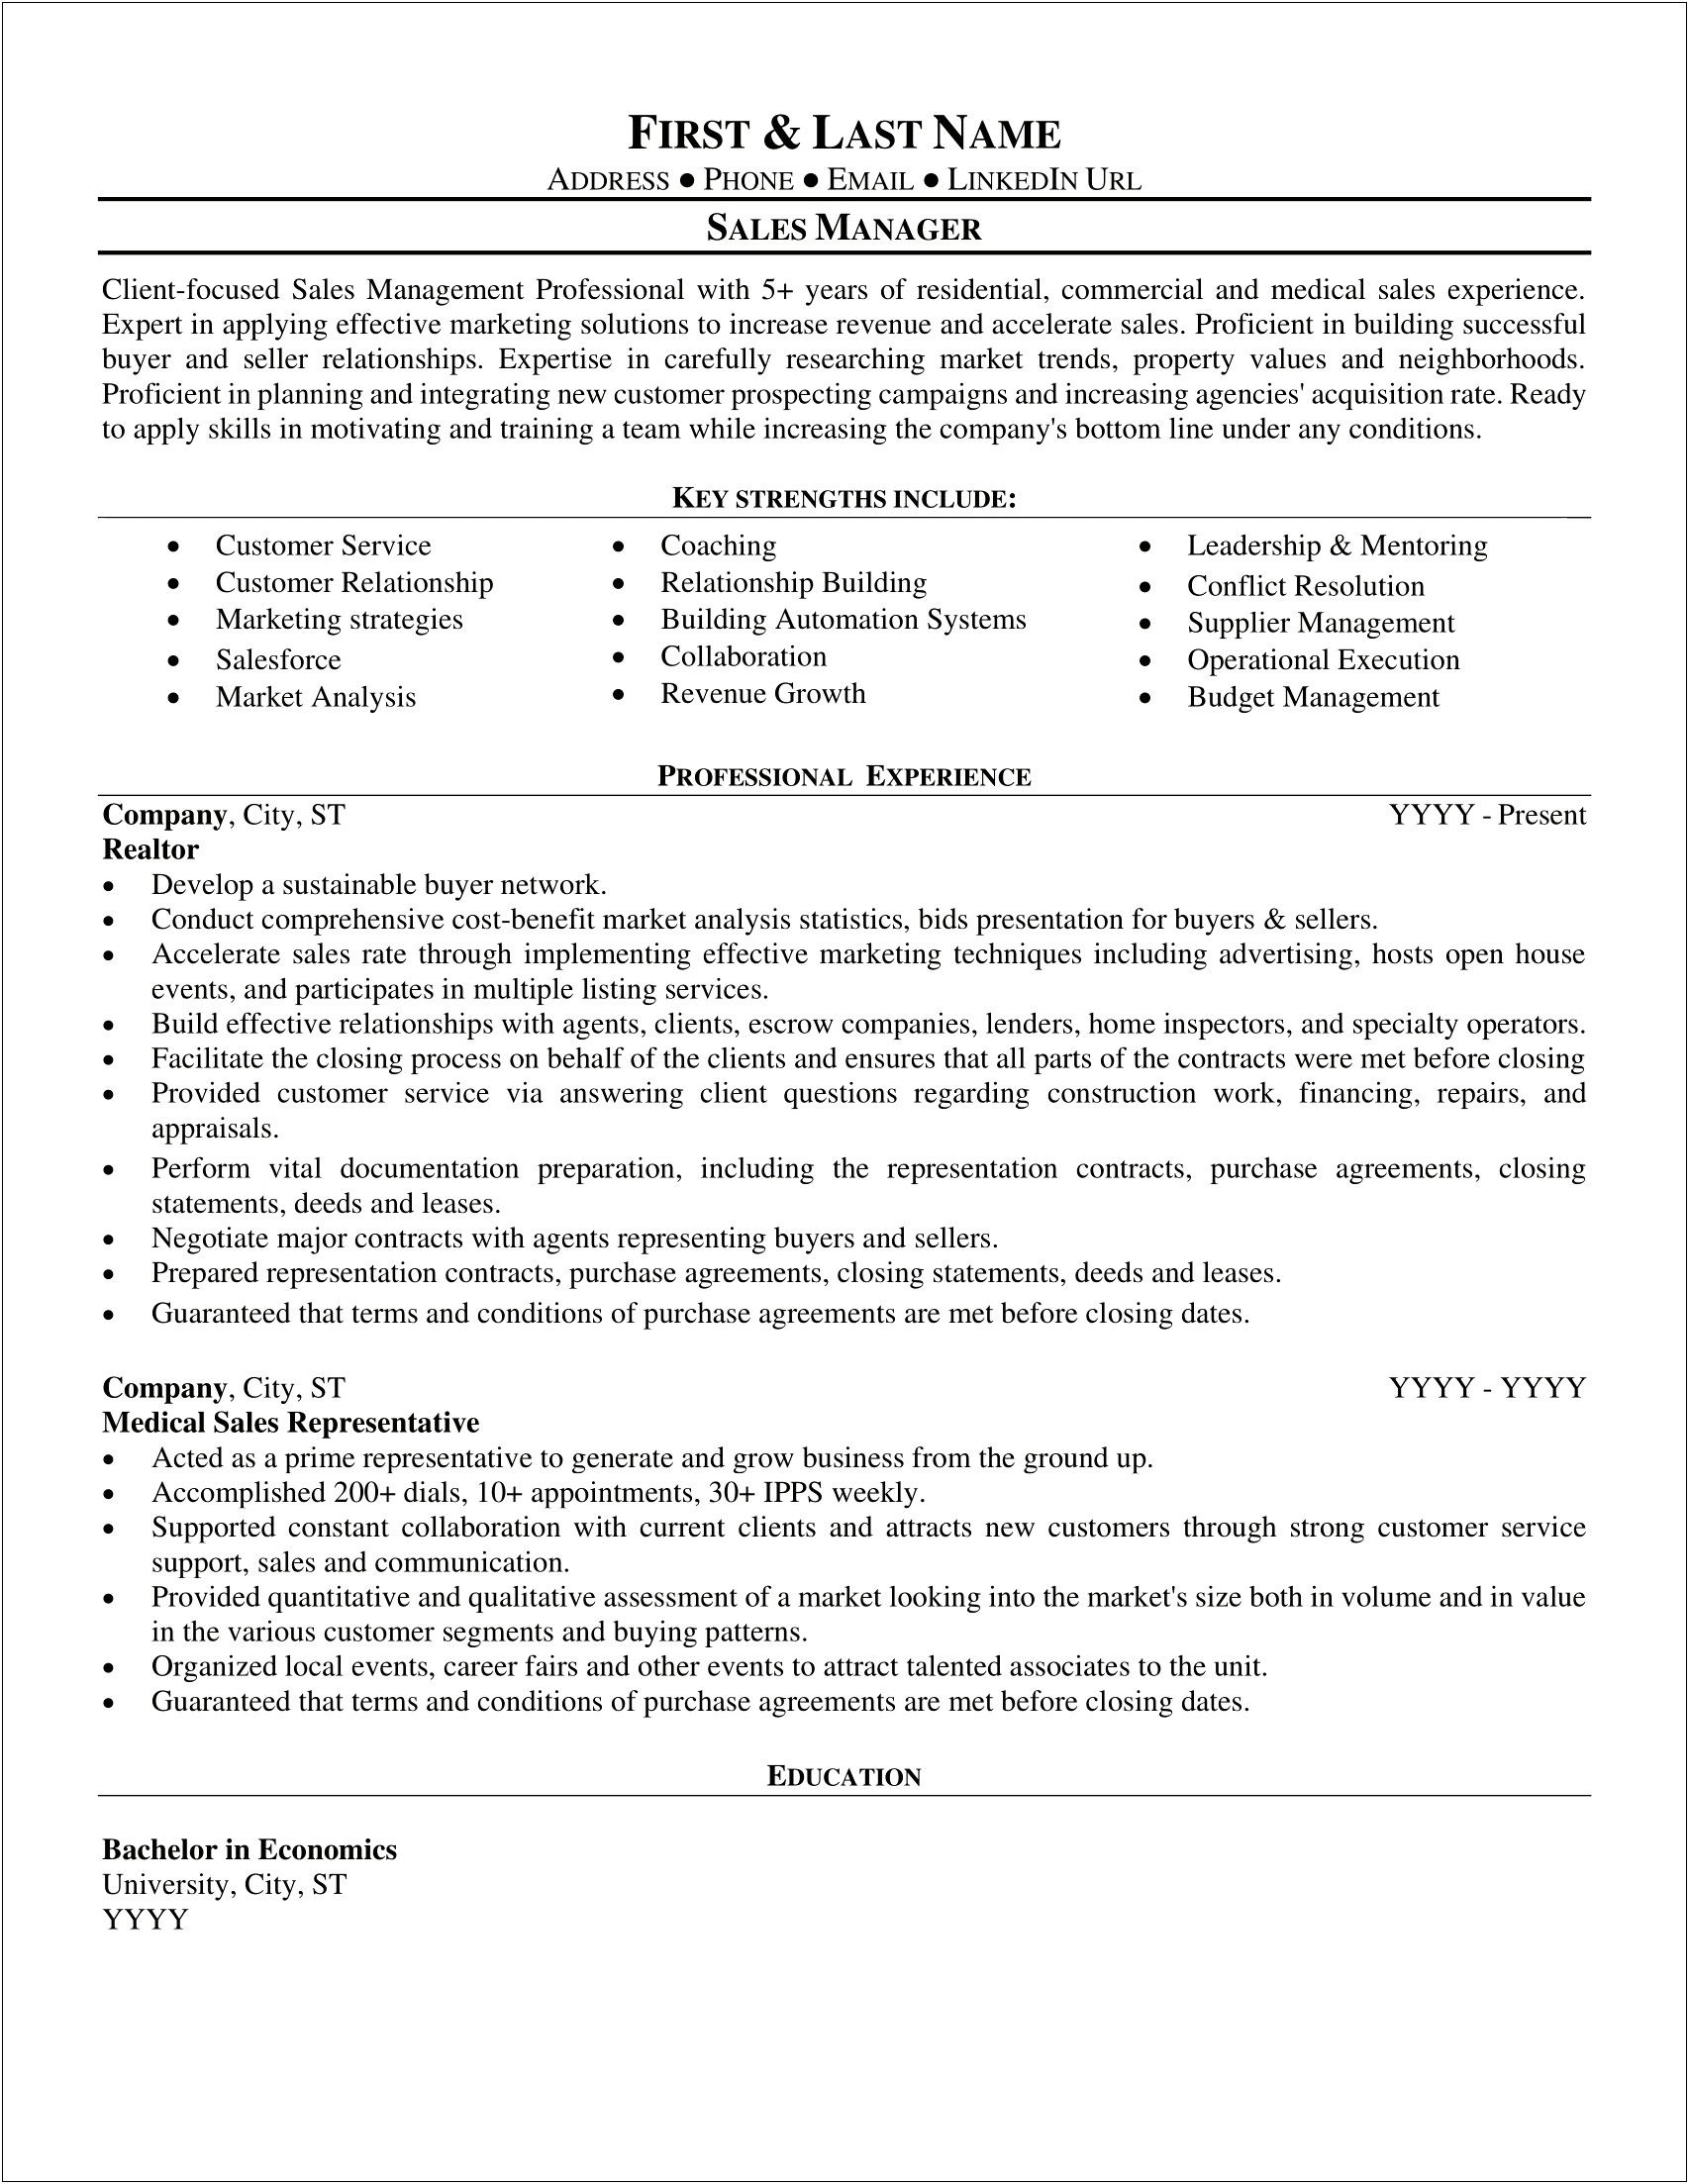 Sales Manager It Resume Samples